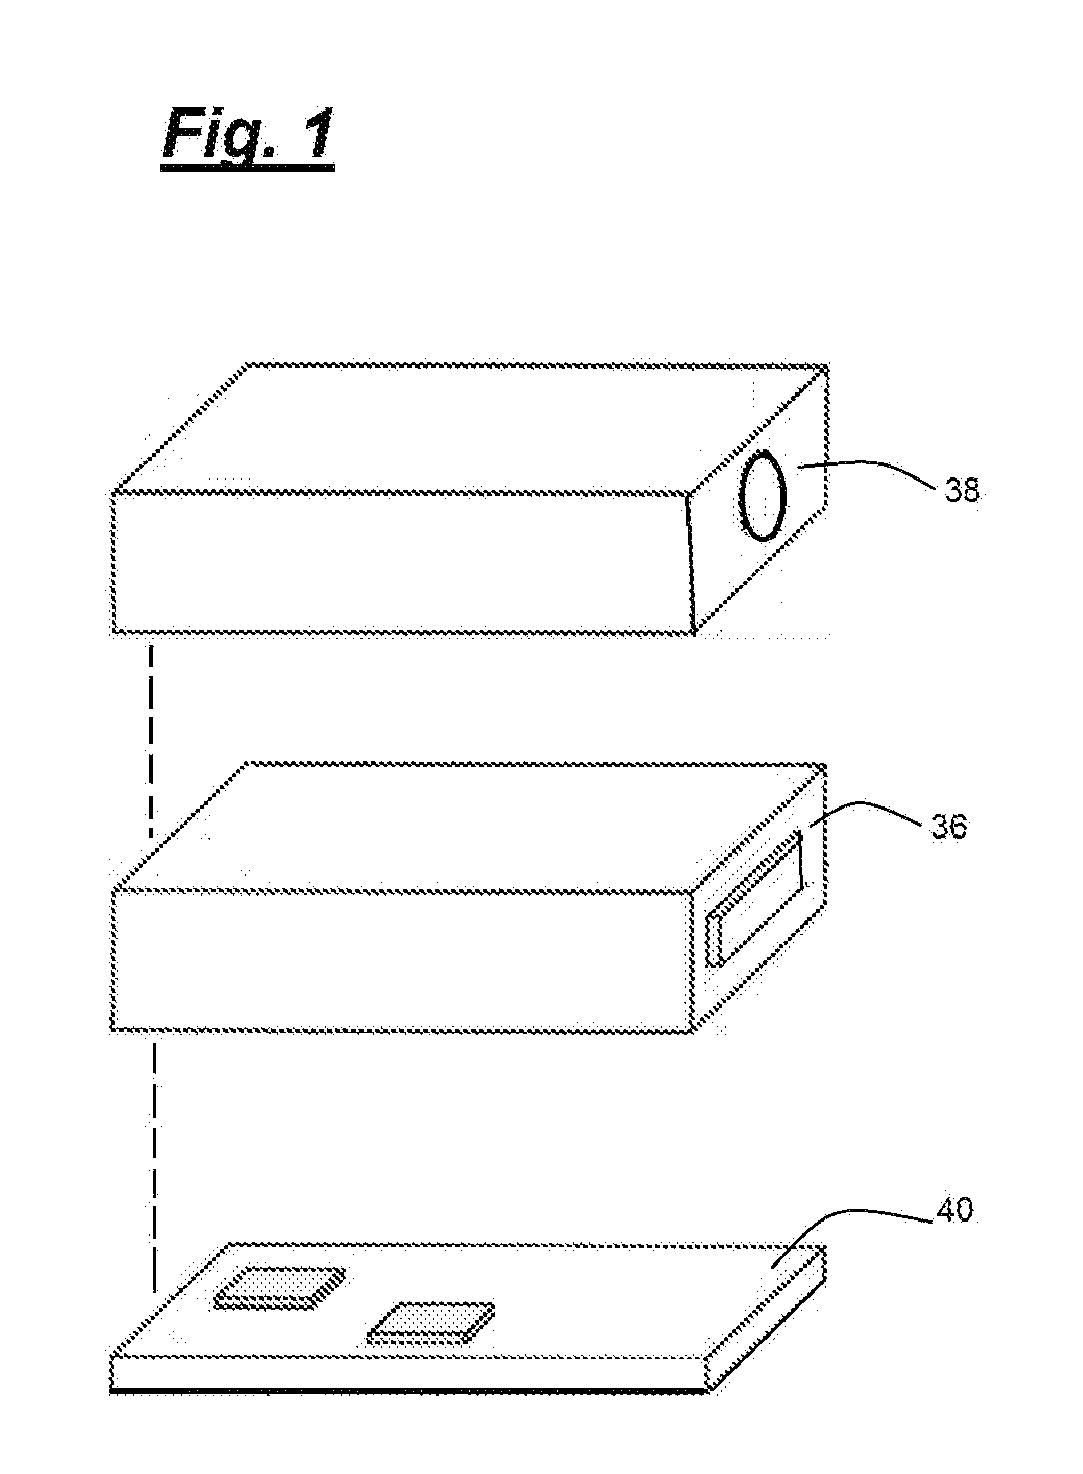 Method and Apparatus for Applying an Architectural Layout to a Building Construction Surface